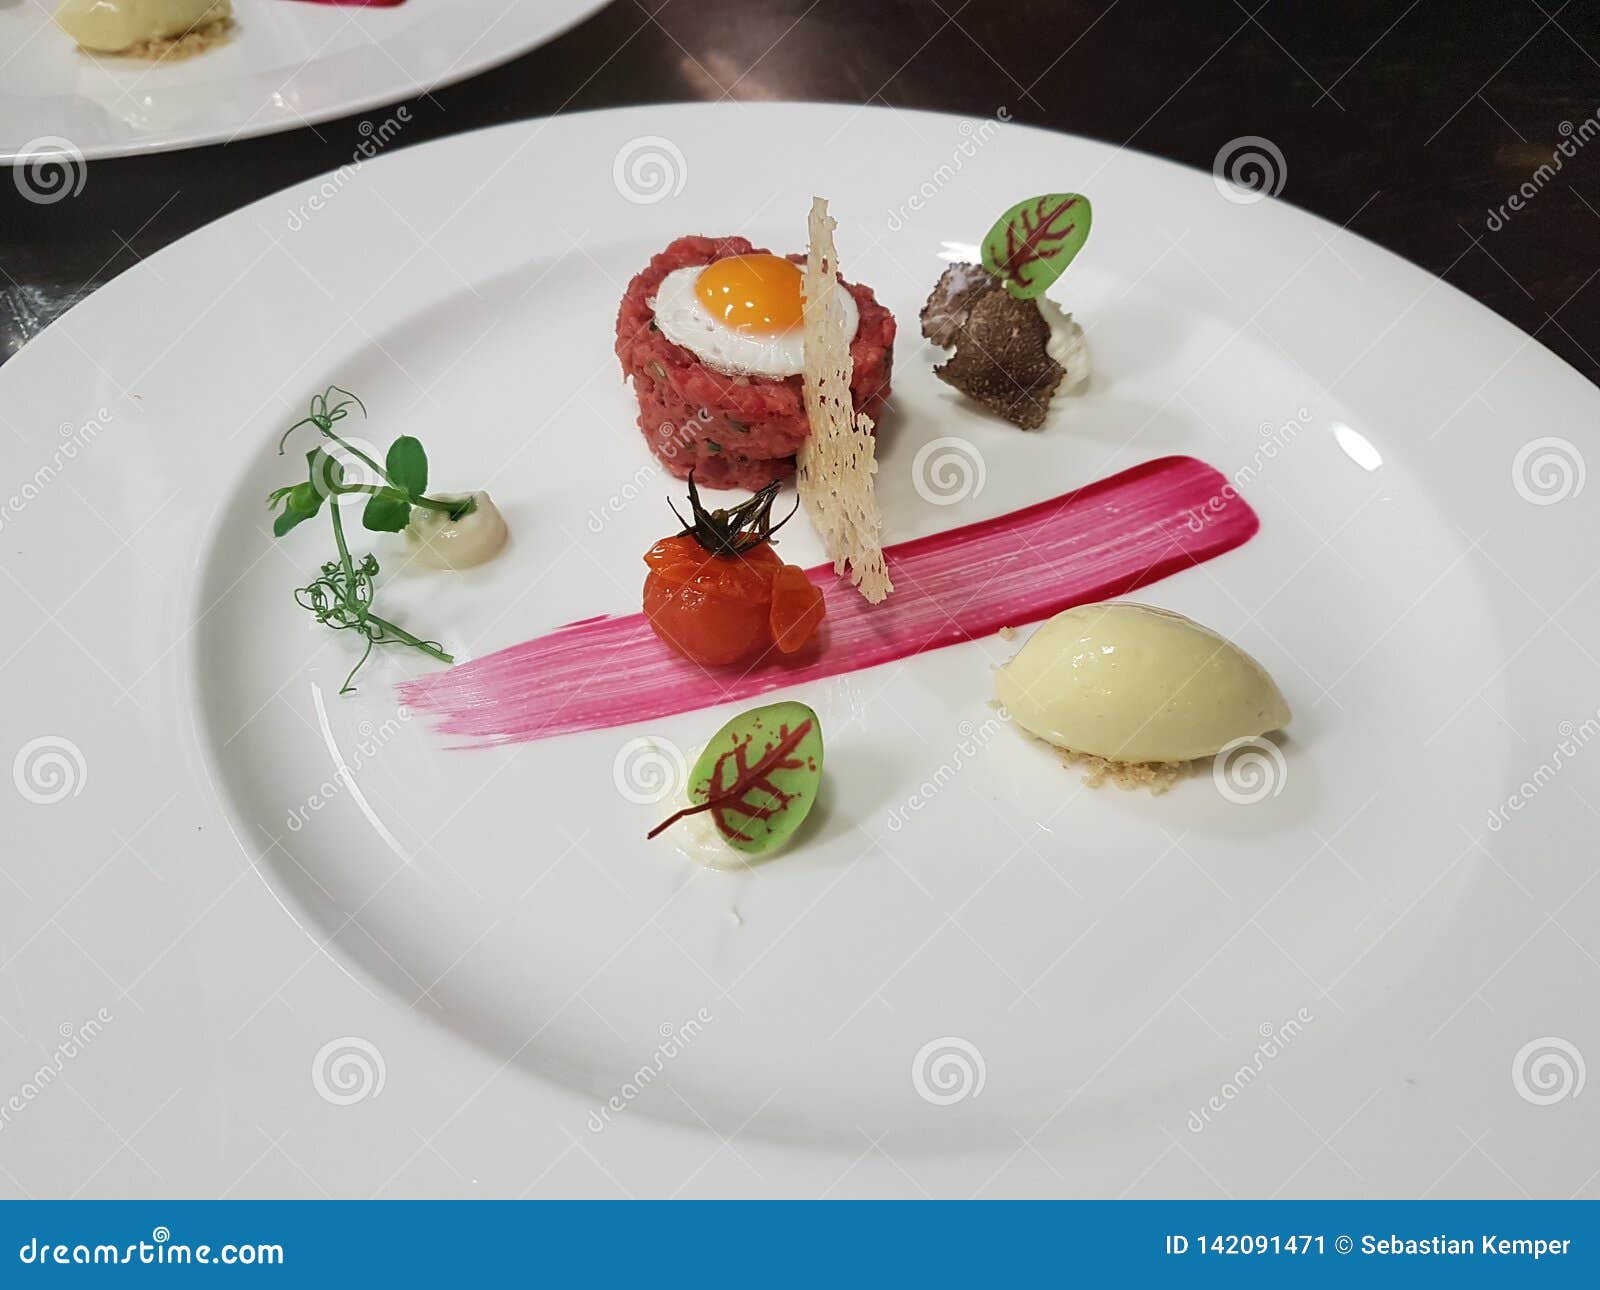 Gourmet food Restaurant stock image. Image of cooking - 142091471